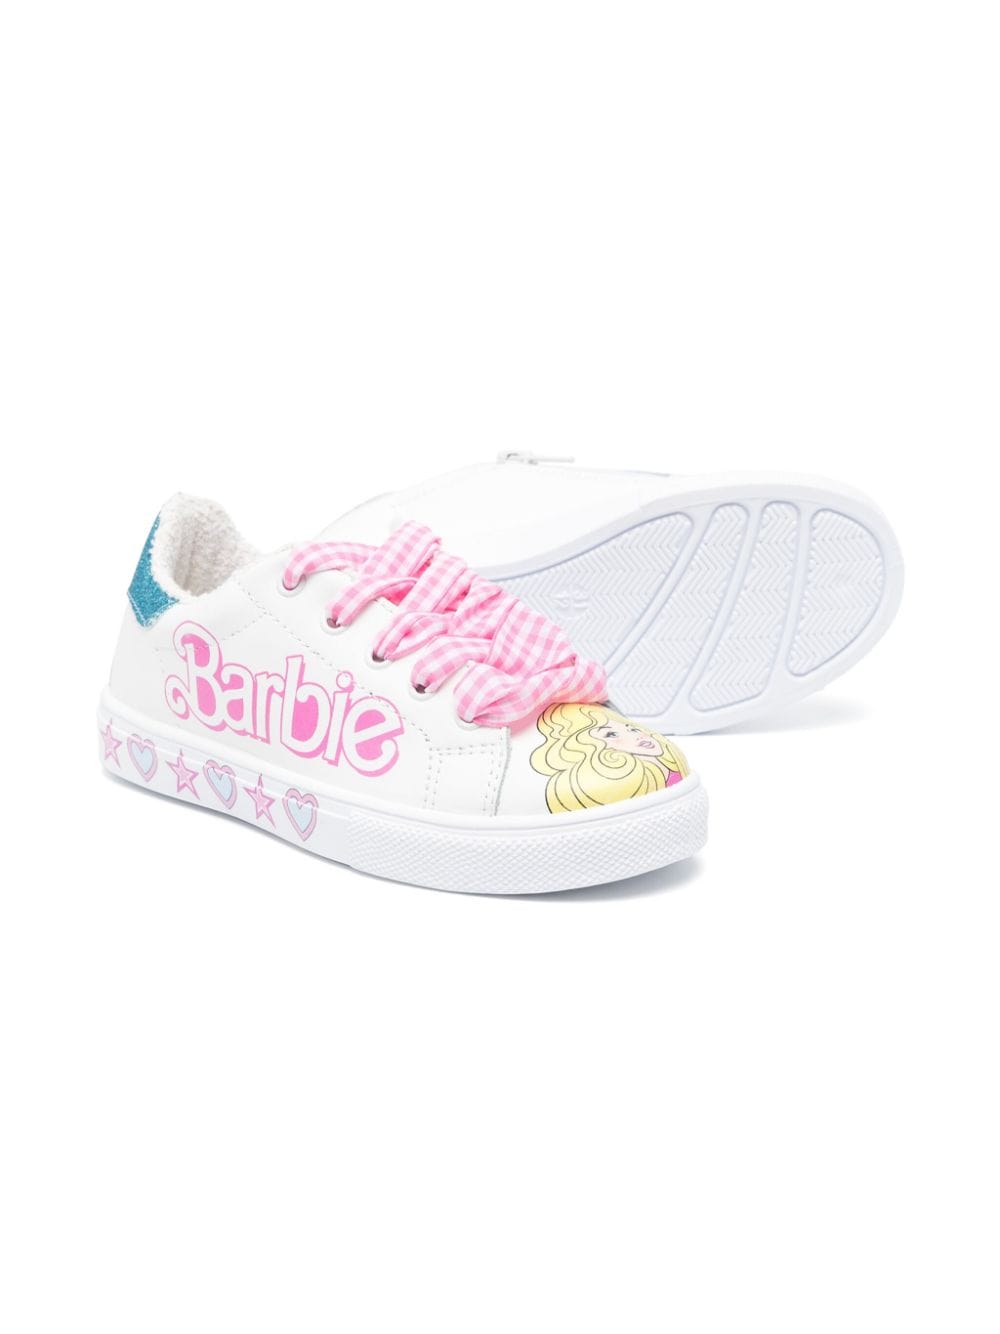 Baskets fille blanches/multicolores